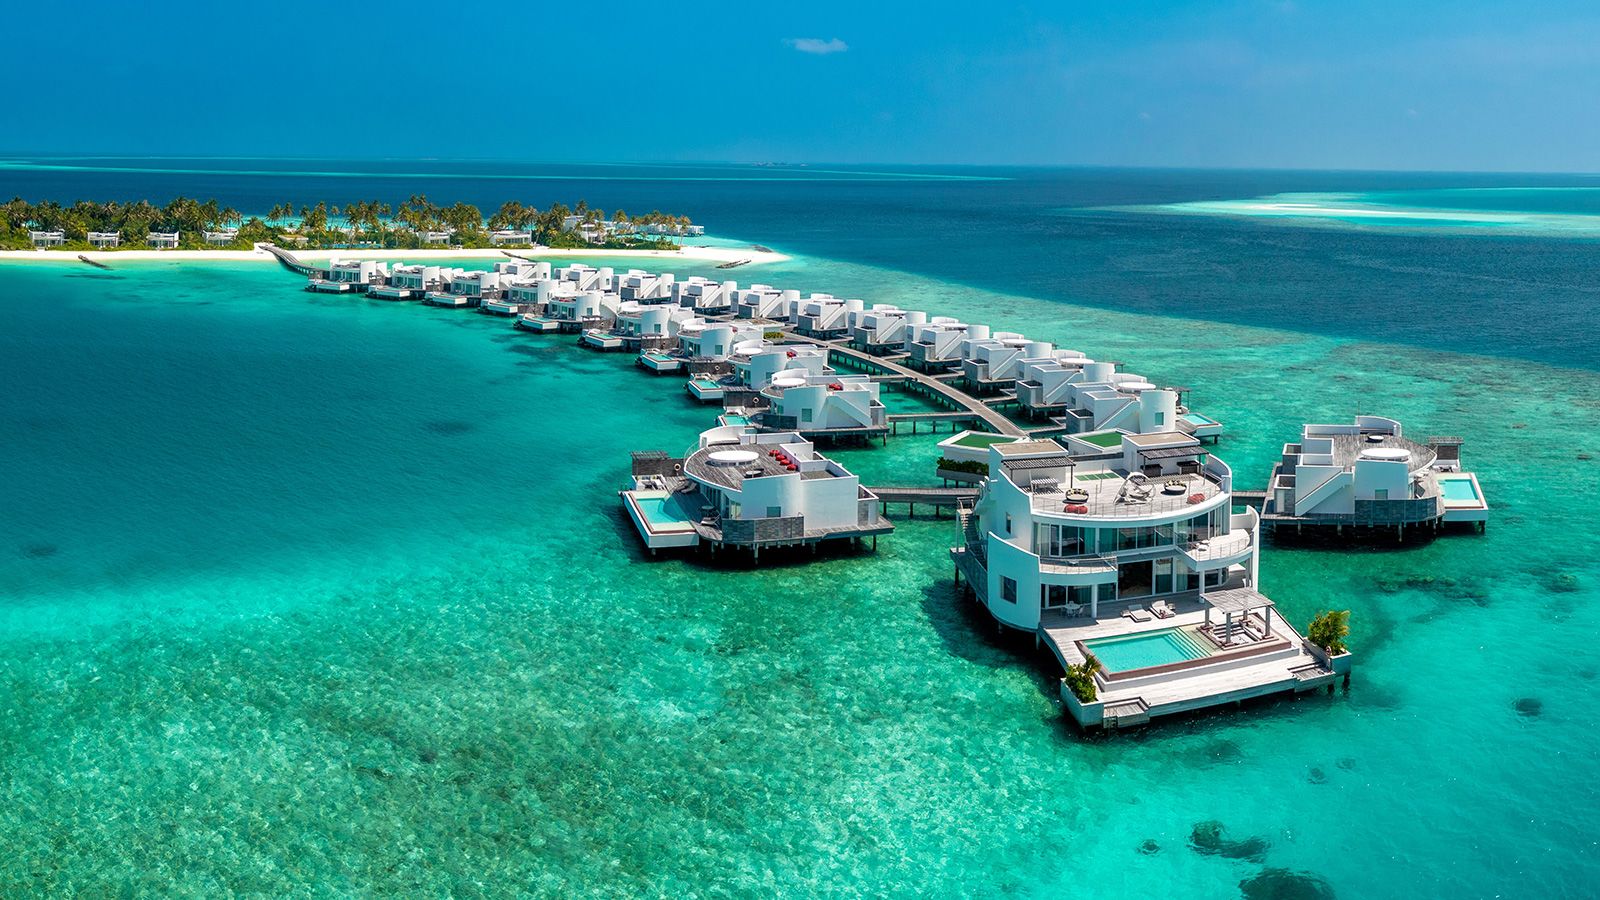 <strong>Jumeirah Maldives Olhahali Island: </strong>The island's overwater villas are impressively large and stylishly decorated. From one to three-bedroom options, each has a rooftop terrace for private BBQ dinners or movie screenings under the stars.